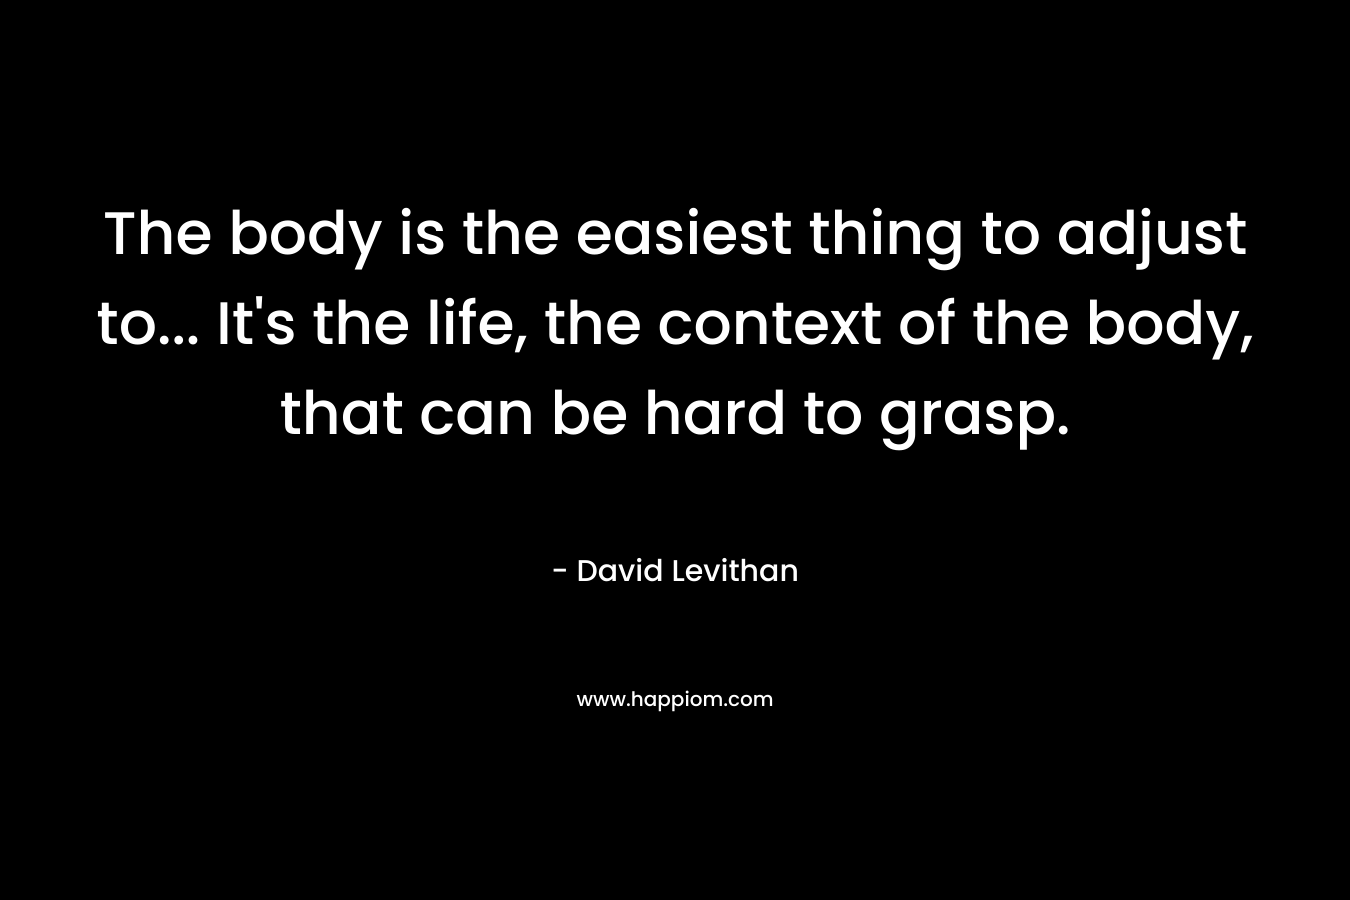 The body is the easiest thing to adjust to... It's the life, the context of the body, that can be hard to grasp.